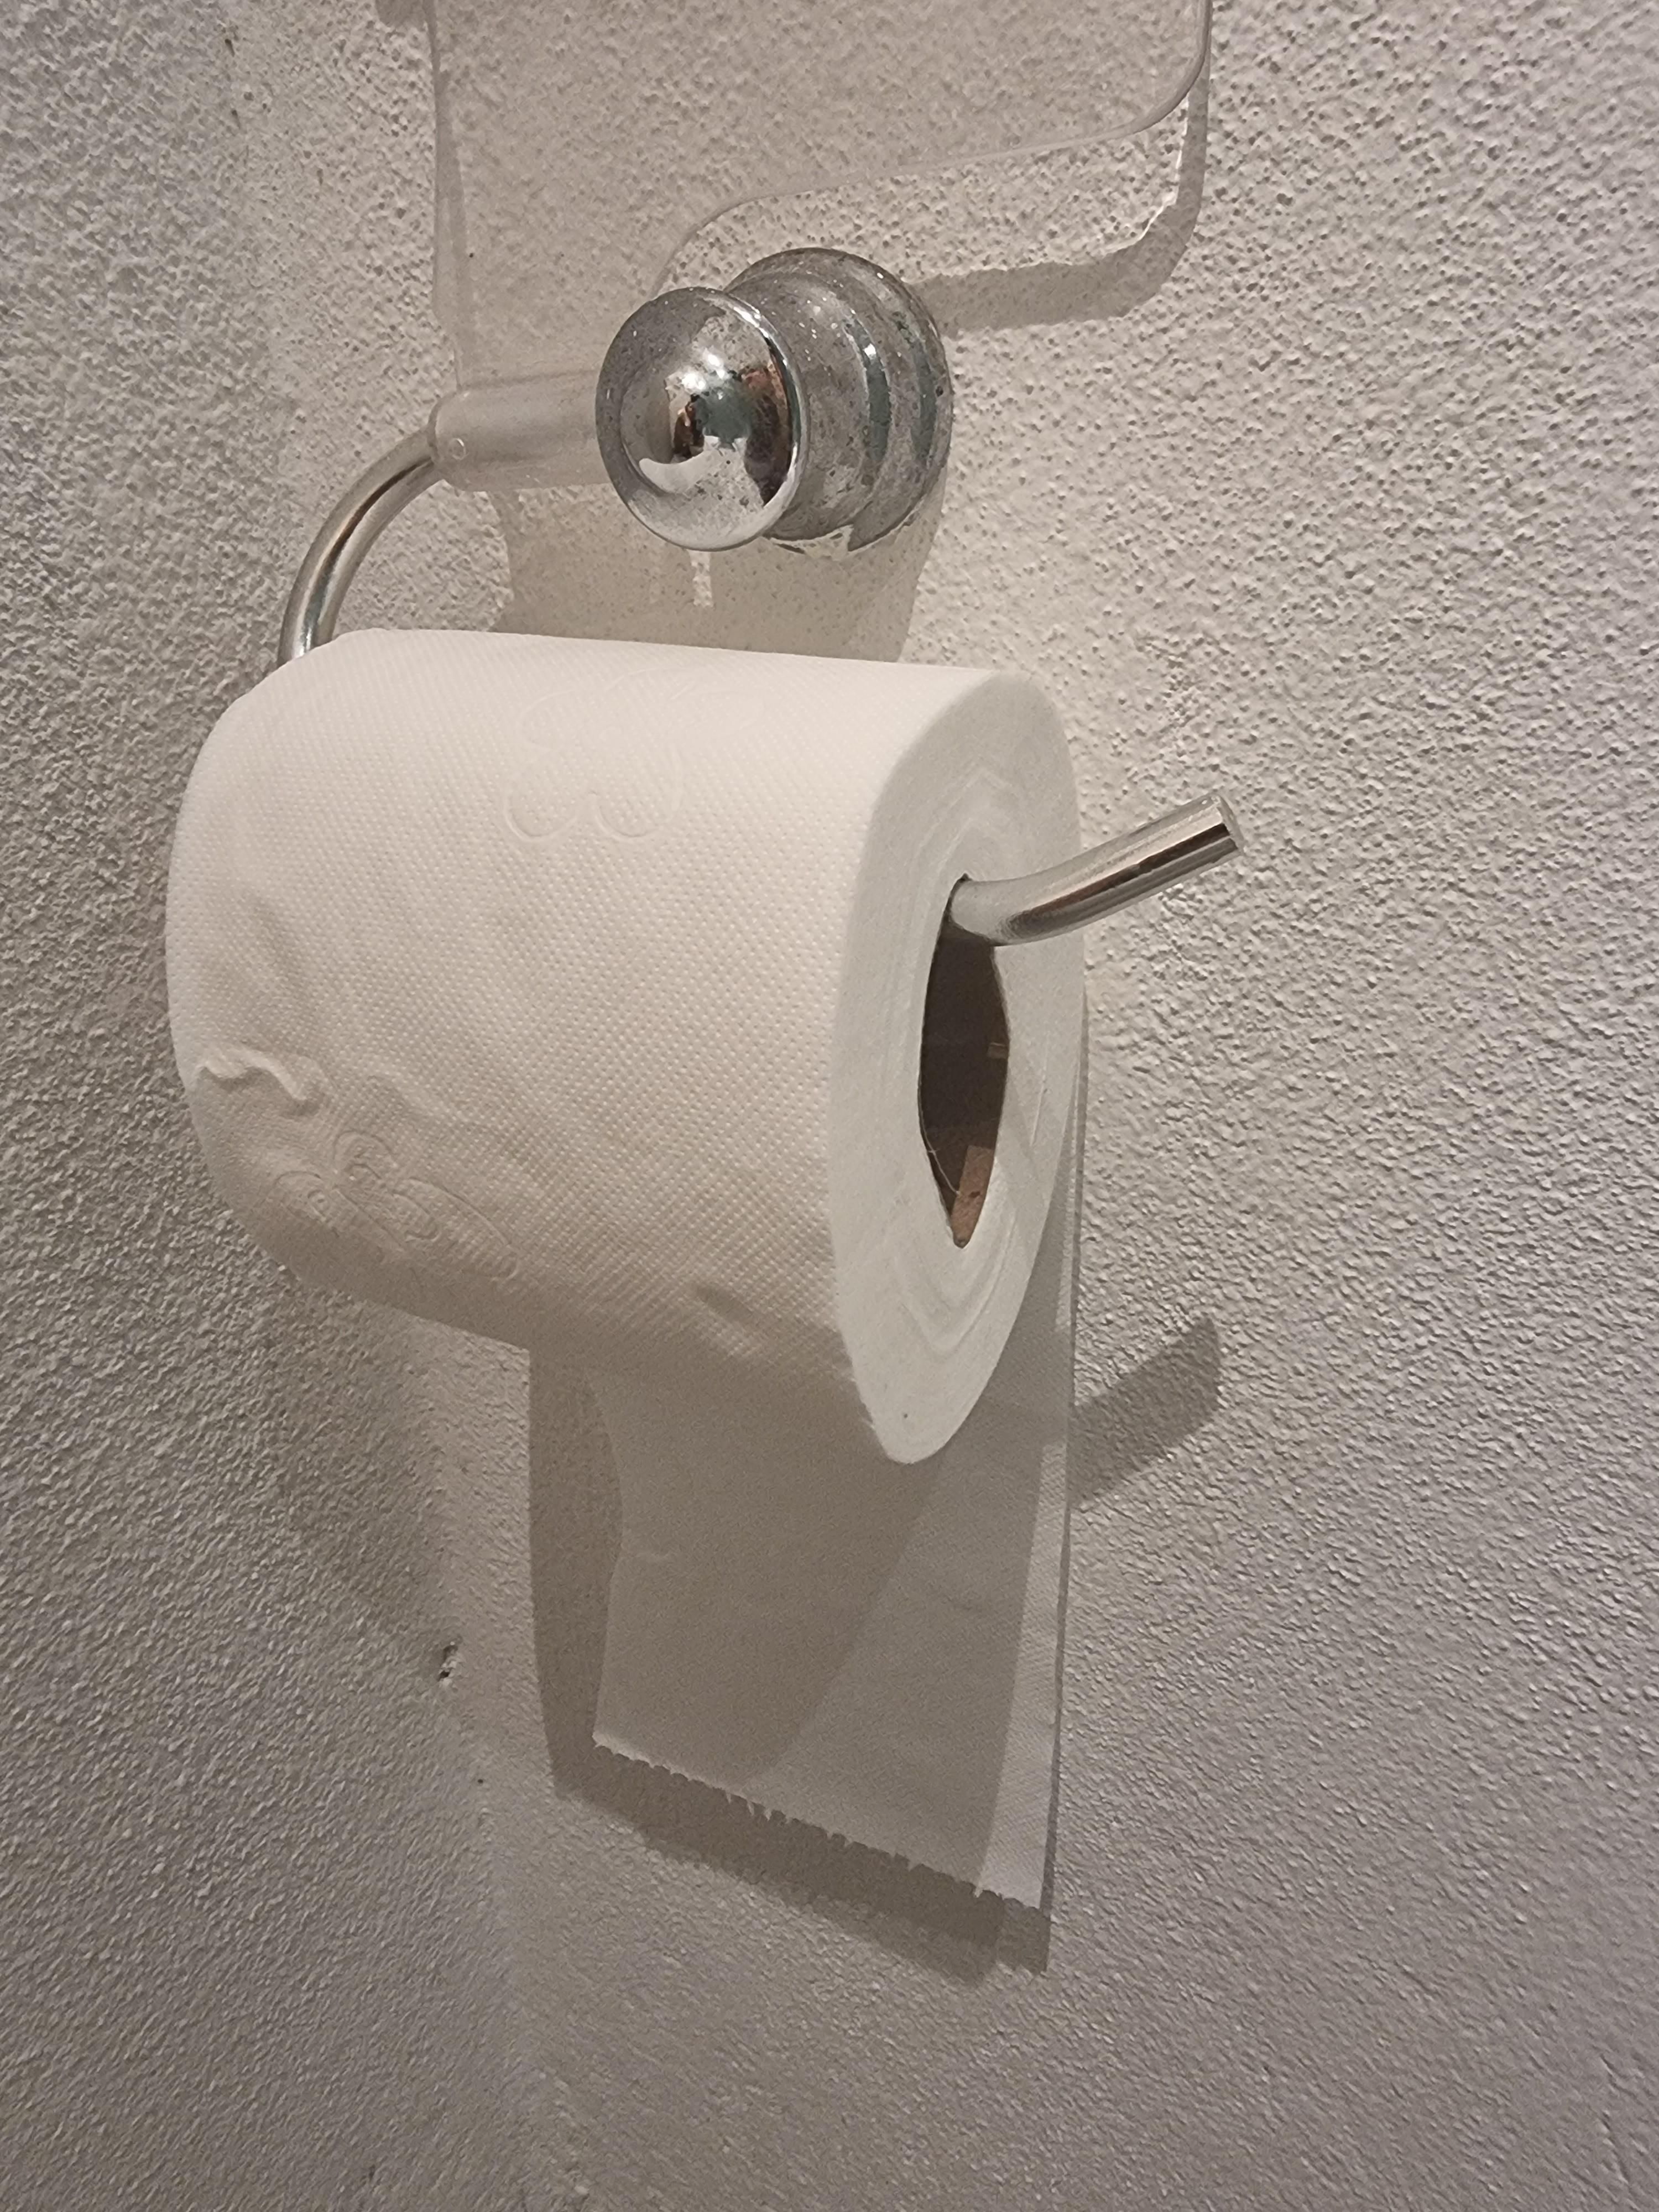 what have i done? Just moved in with my GF and she puts TP like this